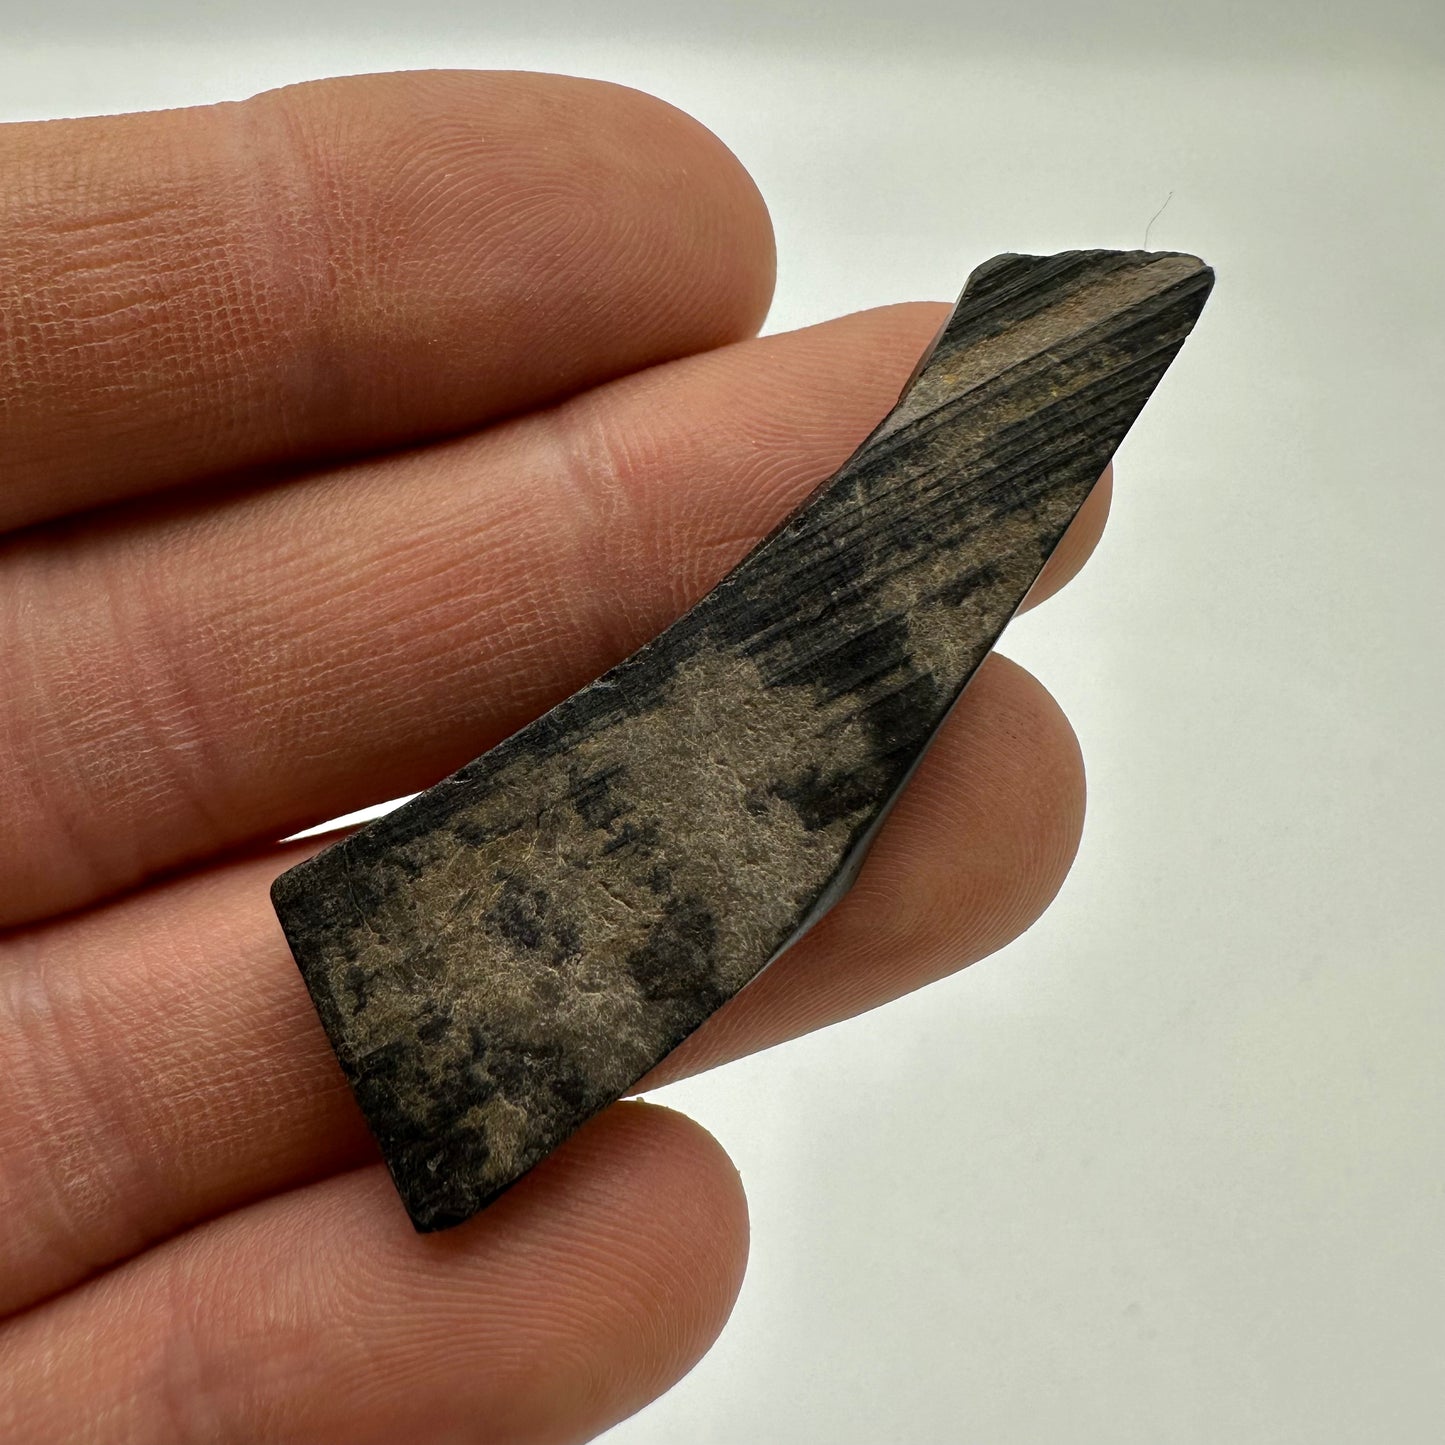 Whitby Jet Specimen (Fossil Wood) - Whitby, North Yorkshire, Jurassic Coast Yorkshire Fossils